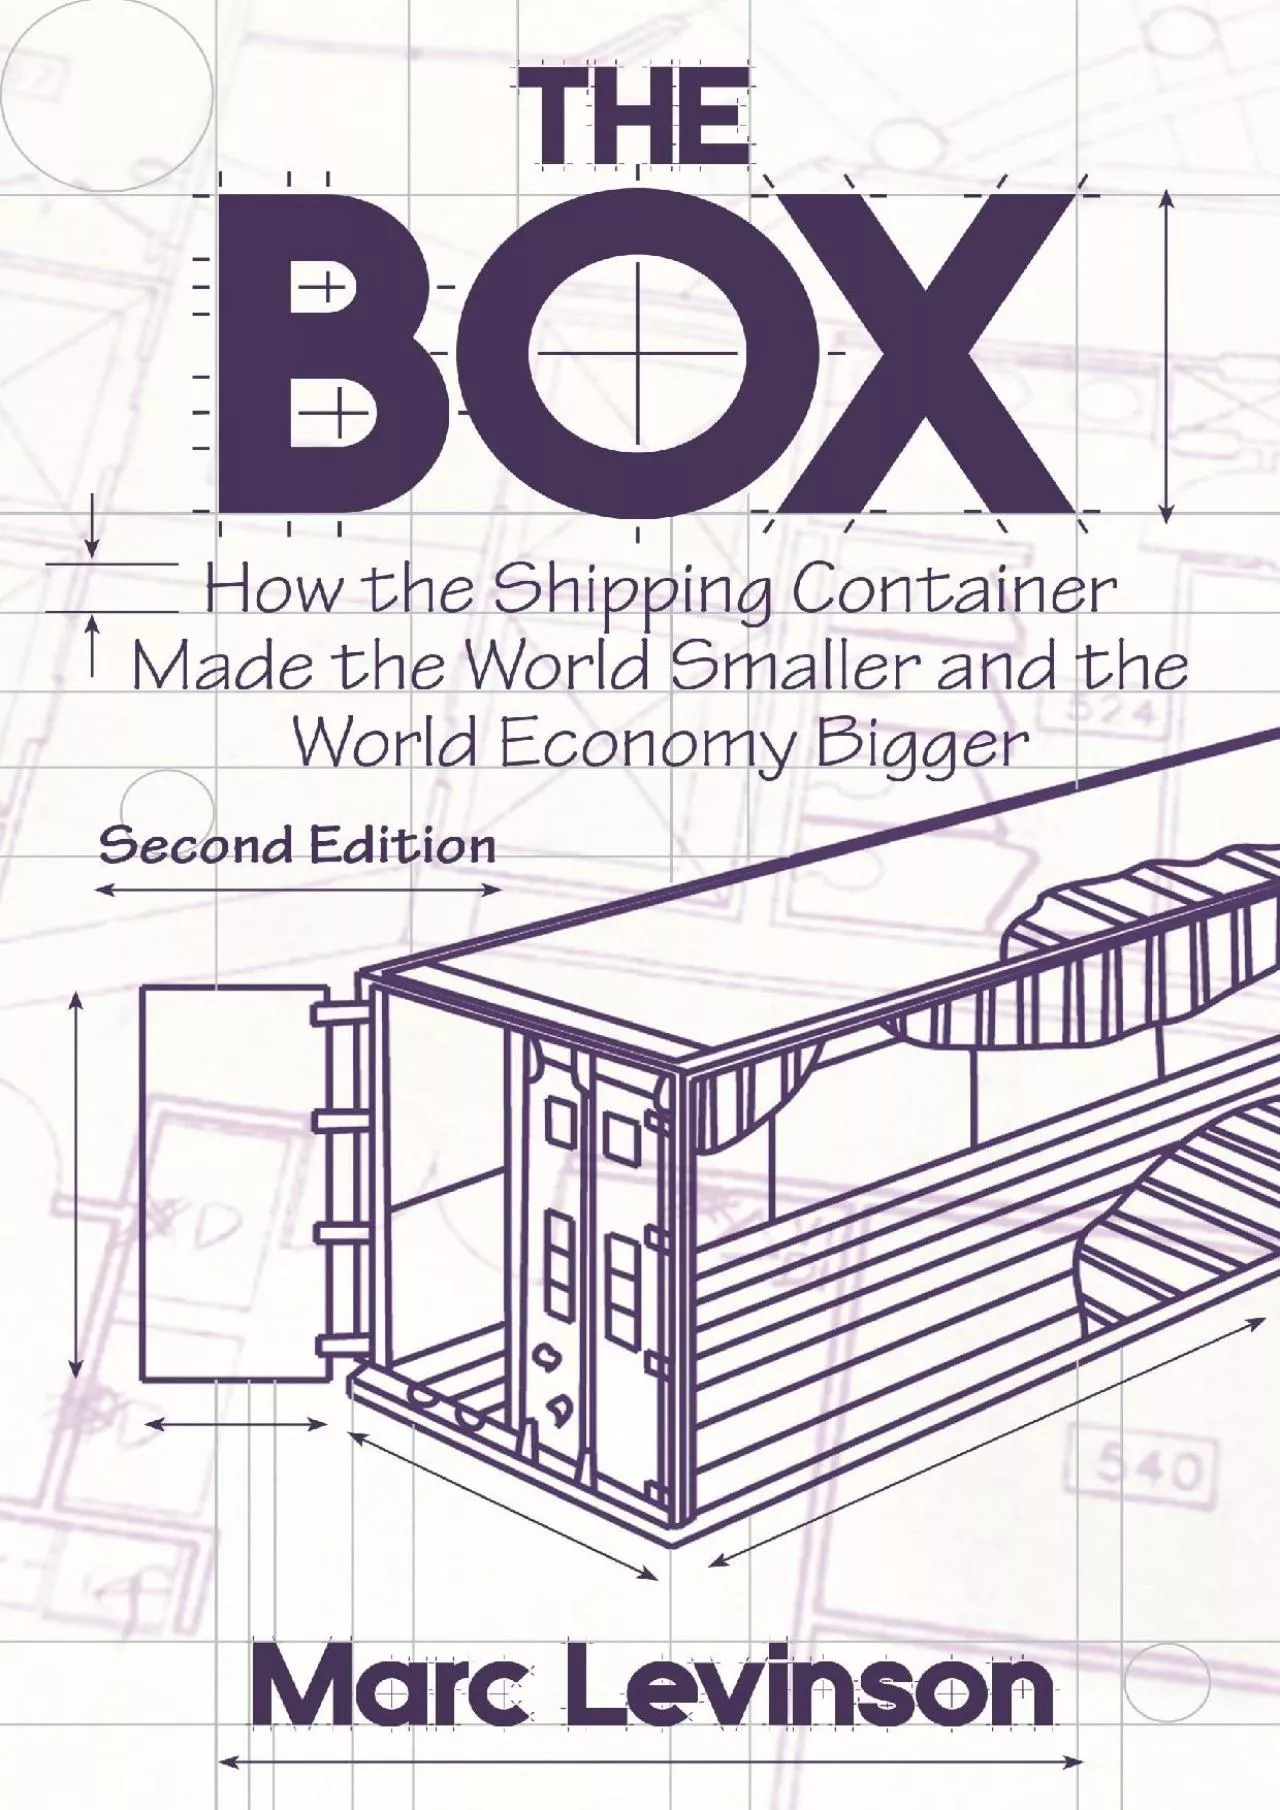 [DOWNLOAD]-The Box: How the Shipping Container Made the World Smaller and the World Economy